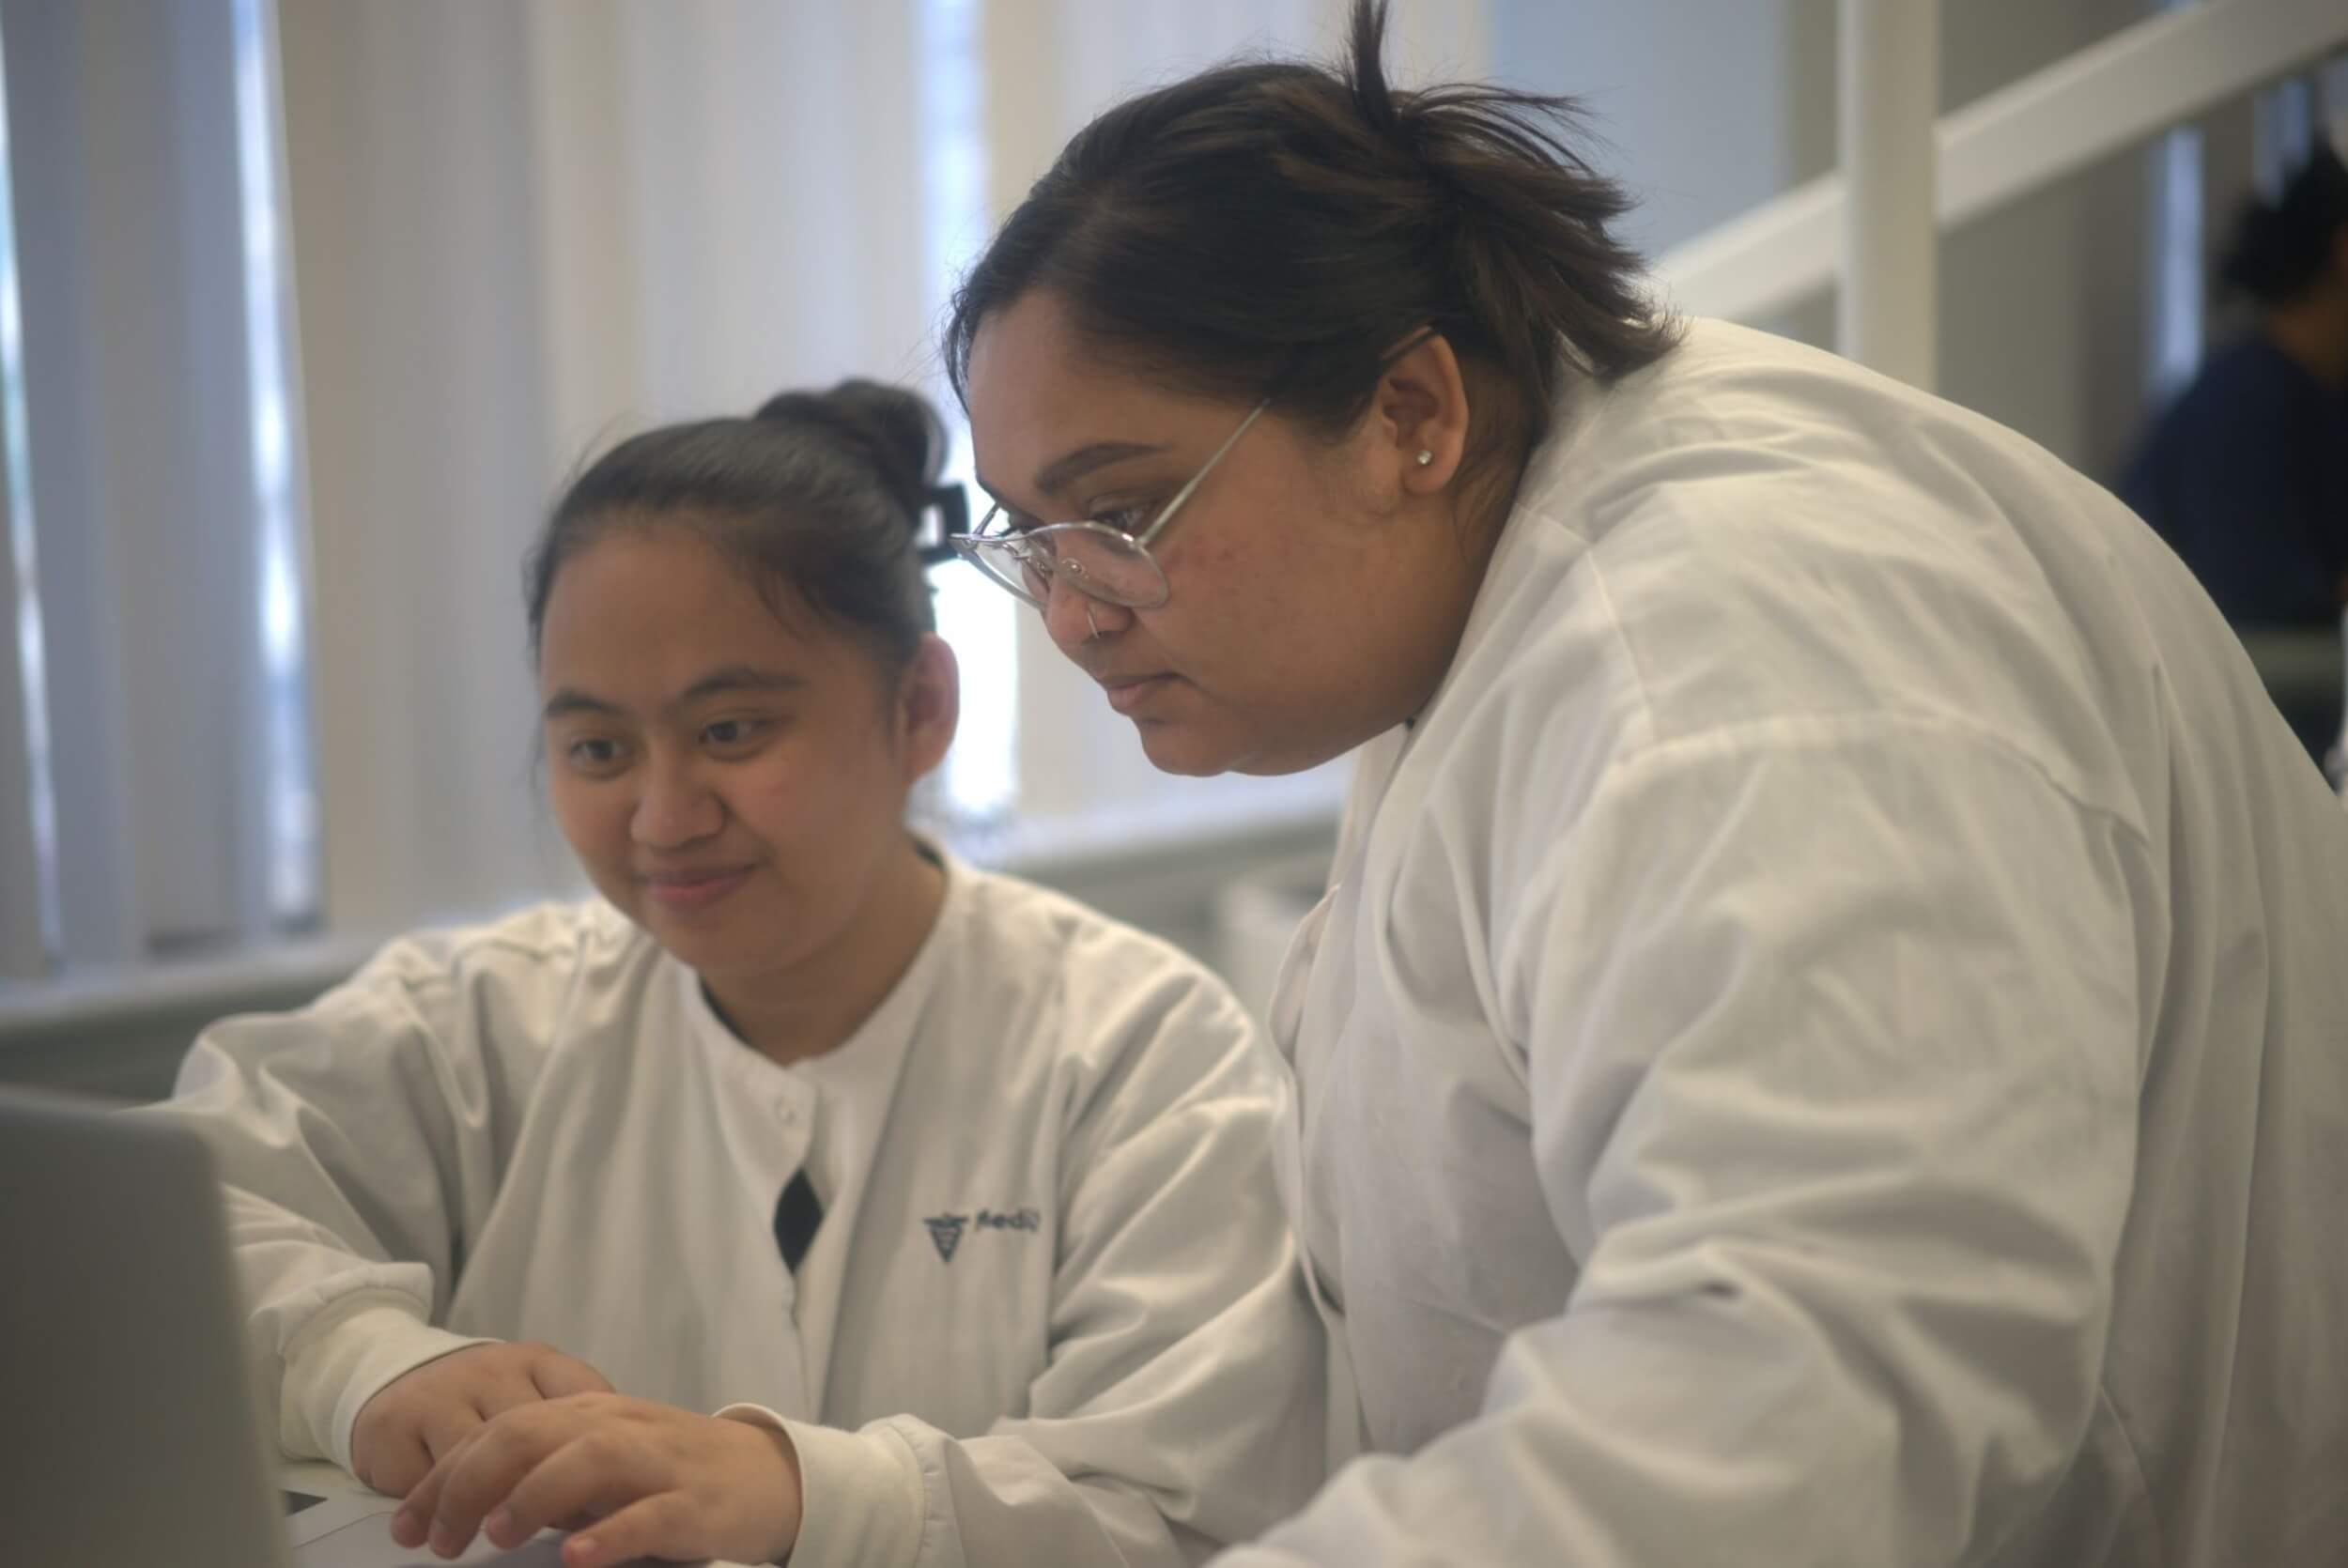 A pair of students completing a dental assistant program in Toronto working together on the computer